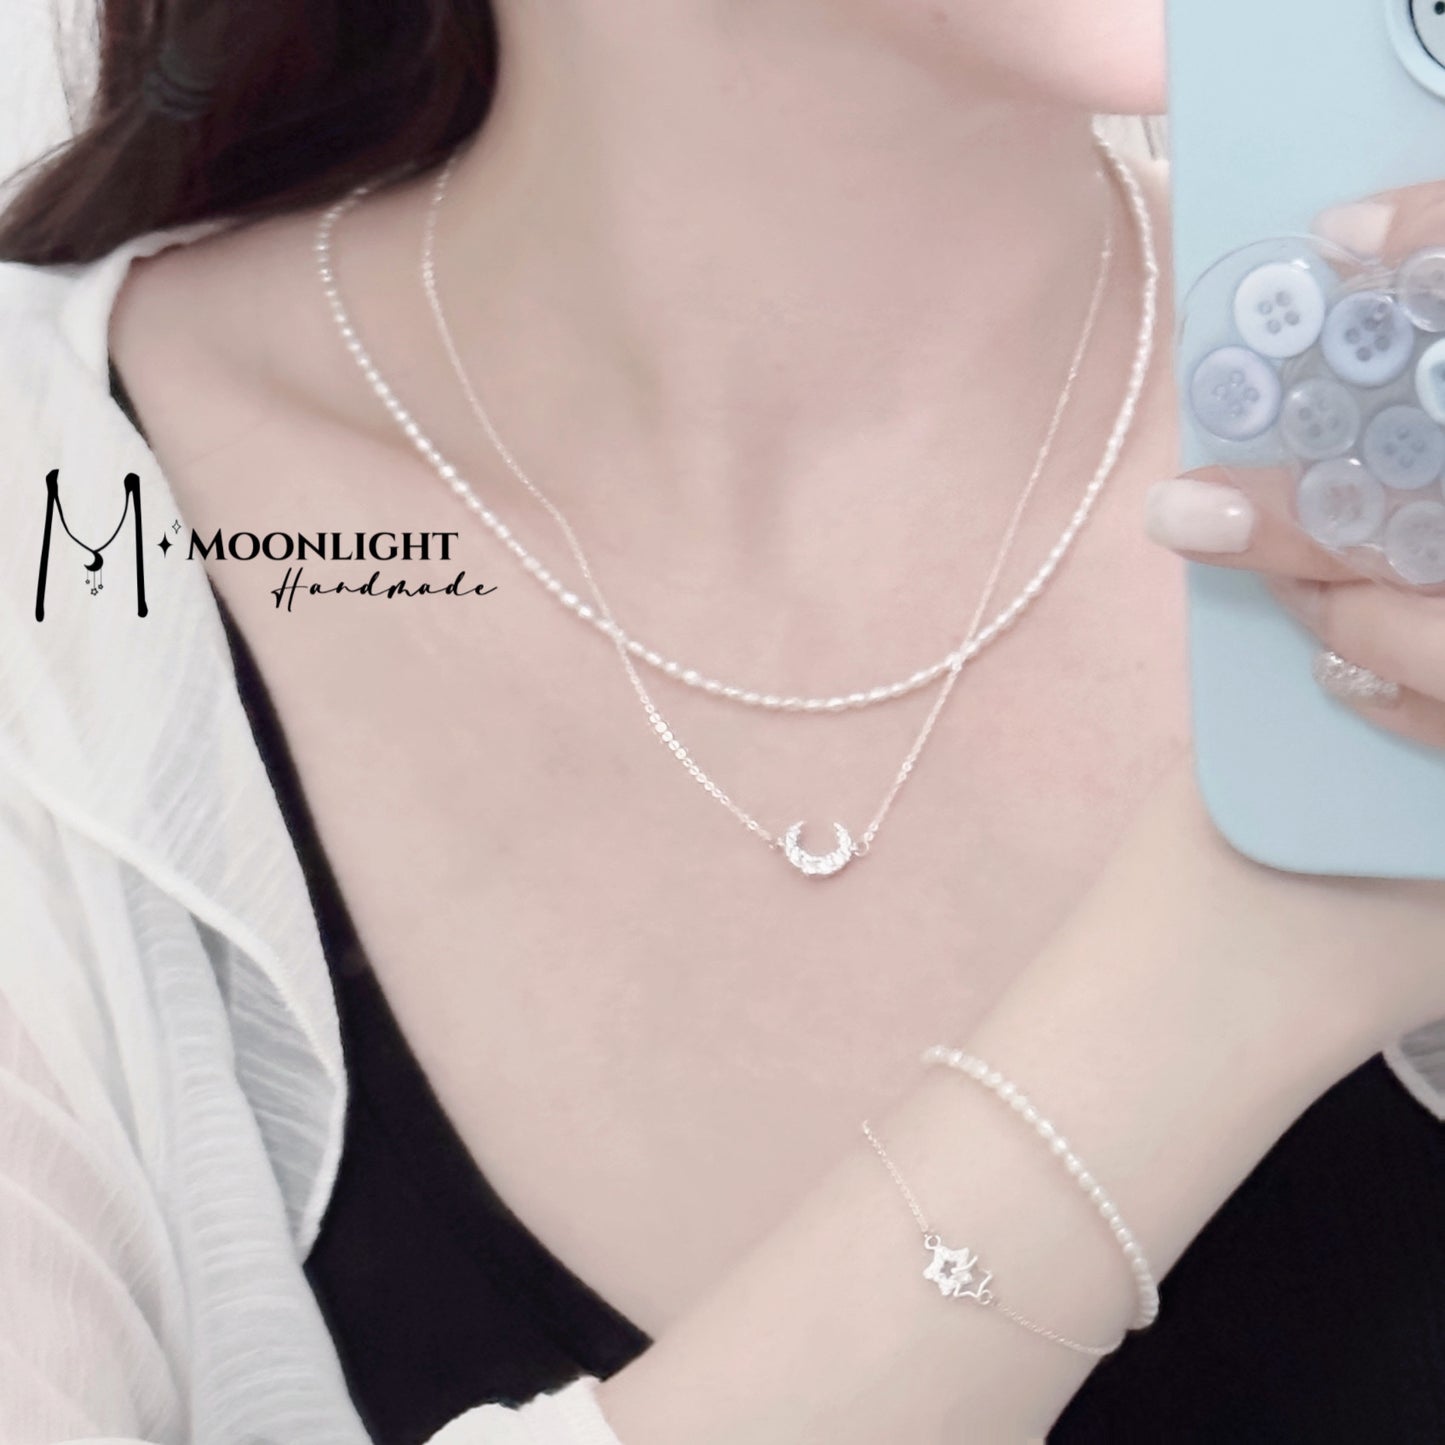 【MmoonlightHandmade】High Quality Rare Size Millet Pearls-Star and Moon Set Jewelry